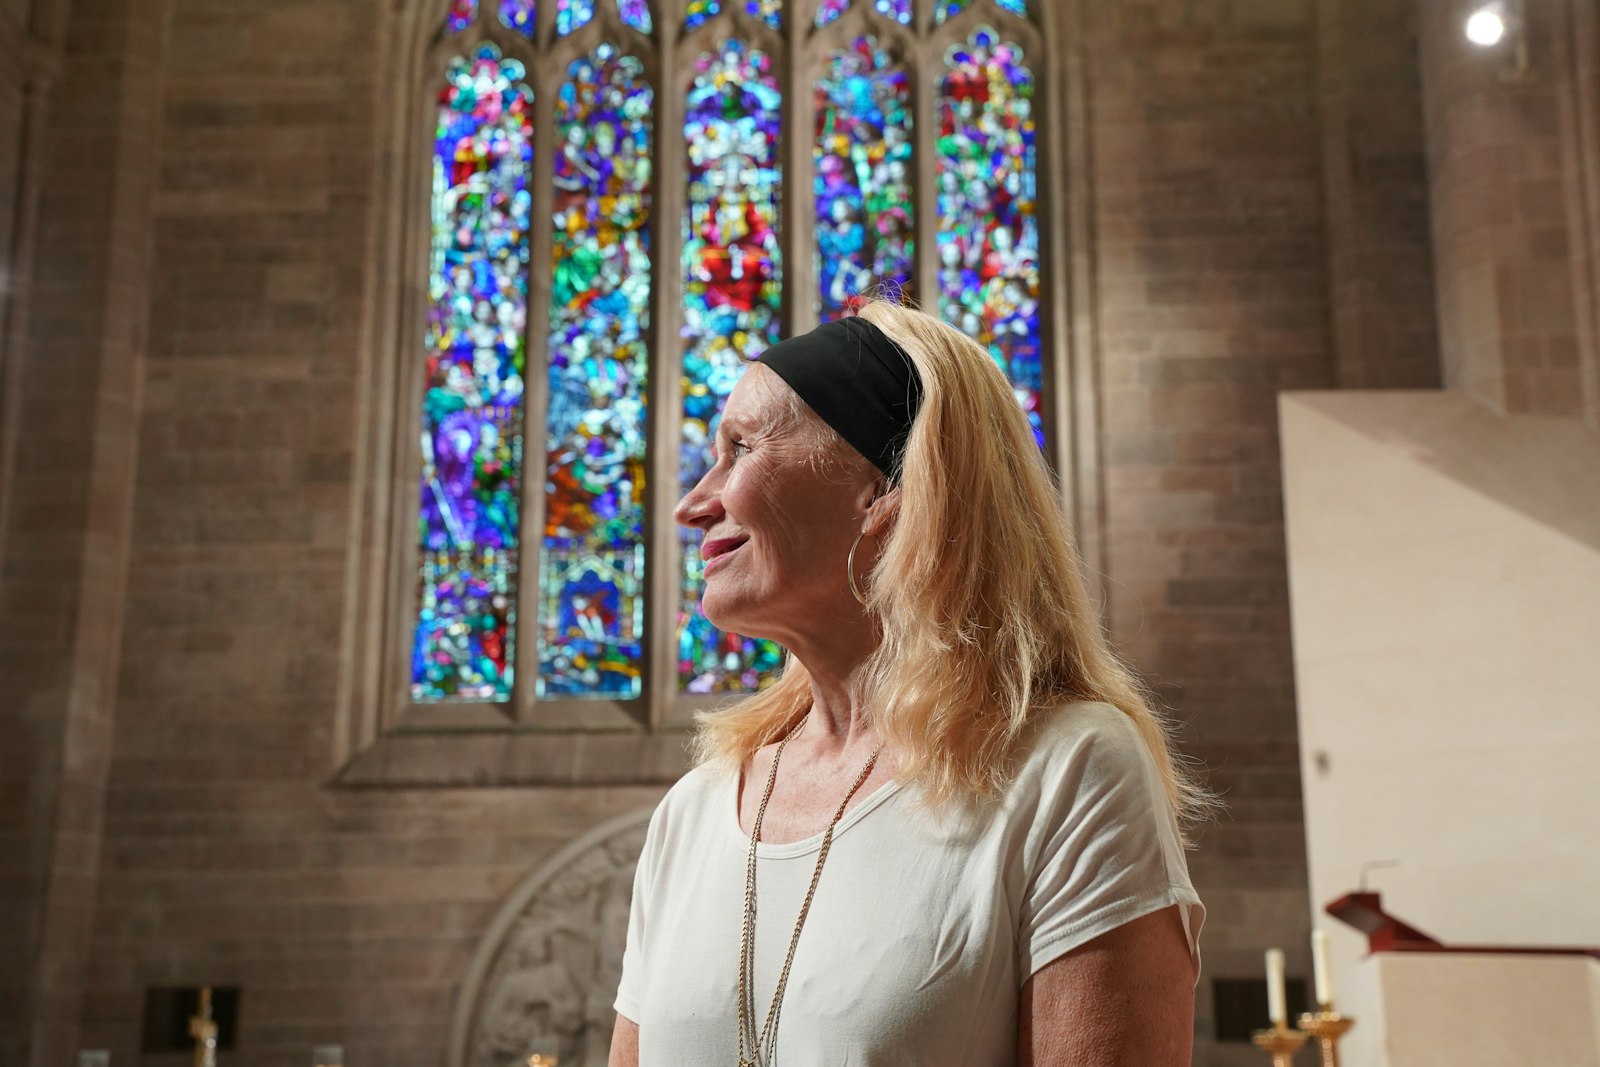 Fuller visits the Cathedral of the Blessed Sacrament every time she comes up to Michigan to visit family. The two nurses that found her in the cathedral gave her the name Mary Church, as opposed to the standard Jane Doe.